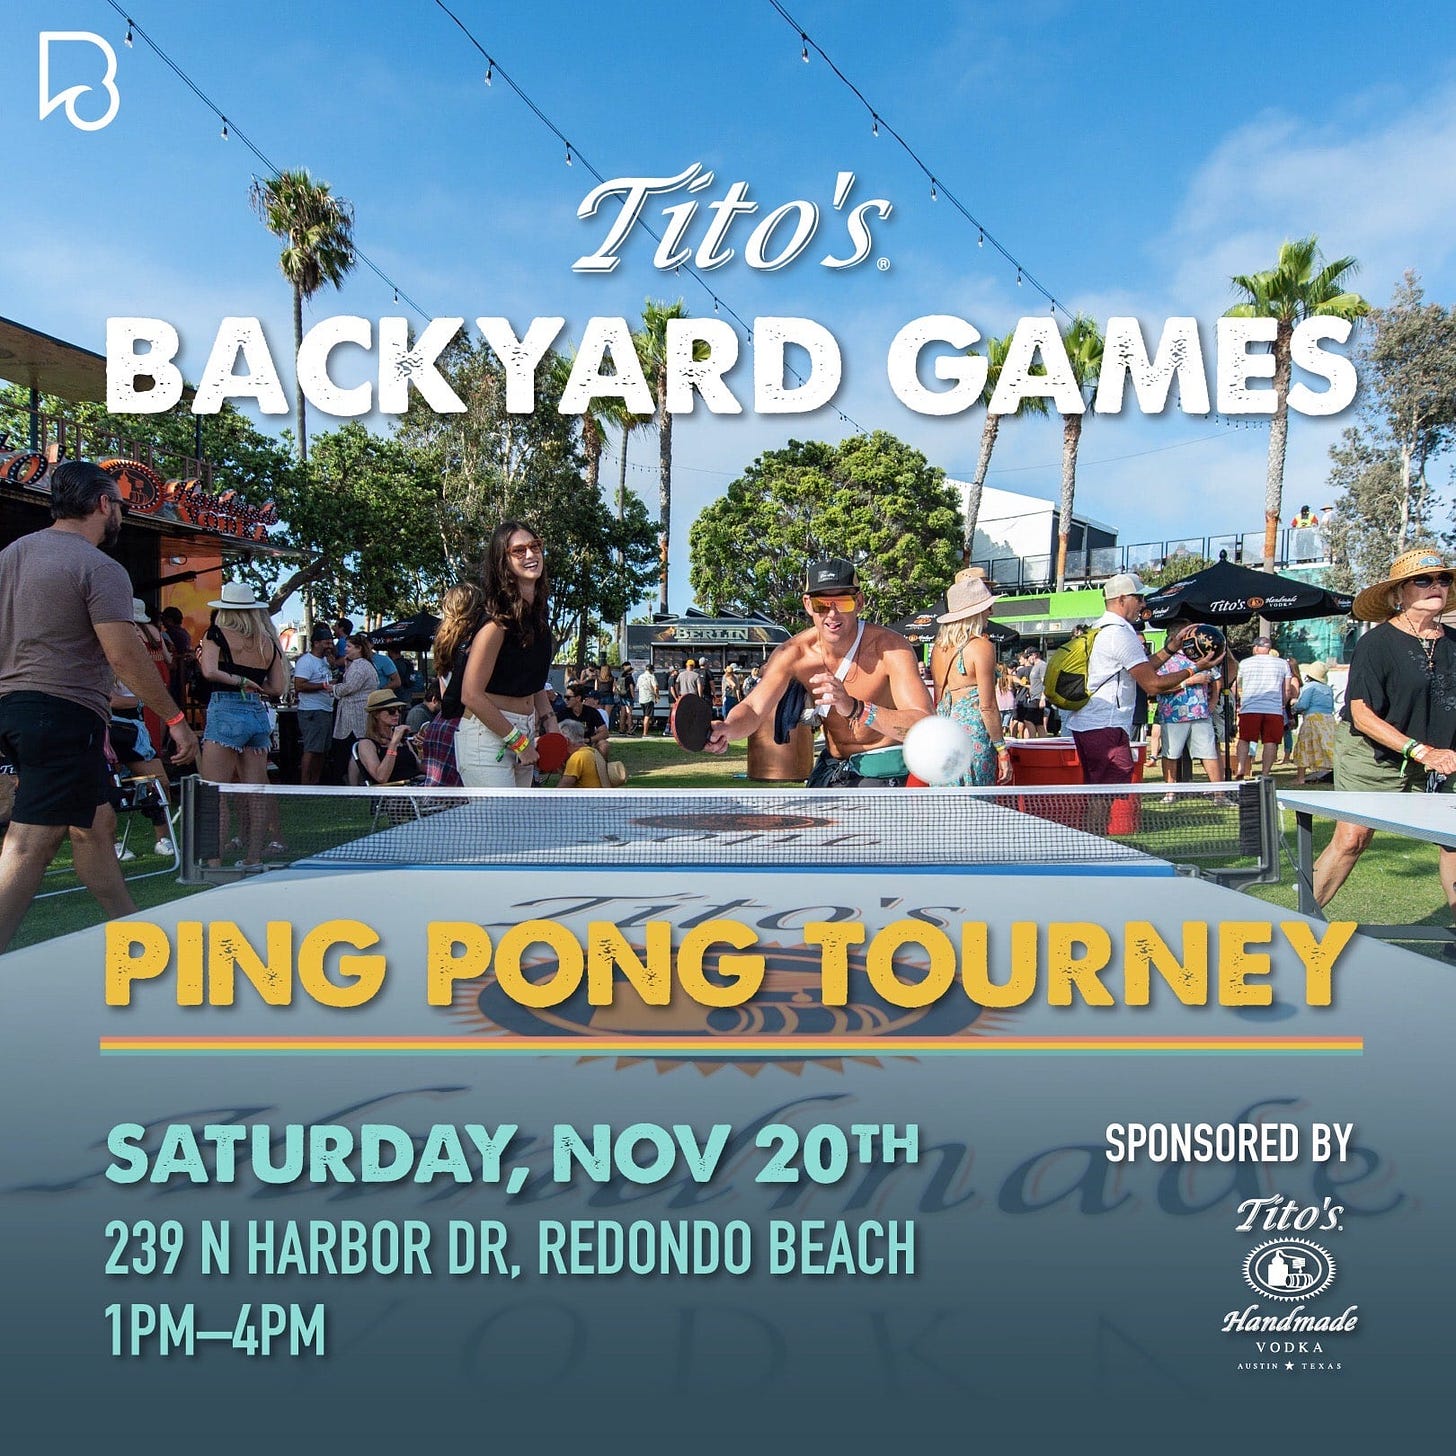 May be an image of 11 people, outdoors and text that says 'Tito's. BACKYARD GAMES PING PONG TOURNEY SATURDAY, NOV 20TH 239 N HARBOR DR, REDONDO BEACH 1PM-4PM SPONSORED BY Tito's. Handmade m'